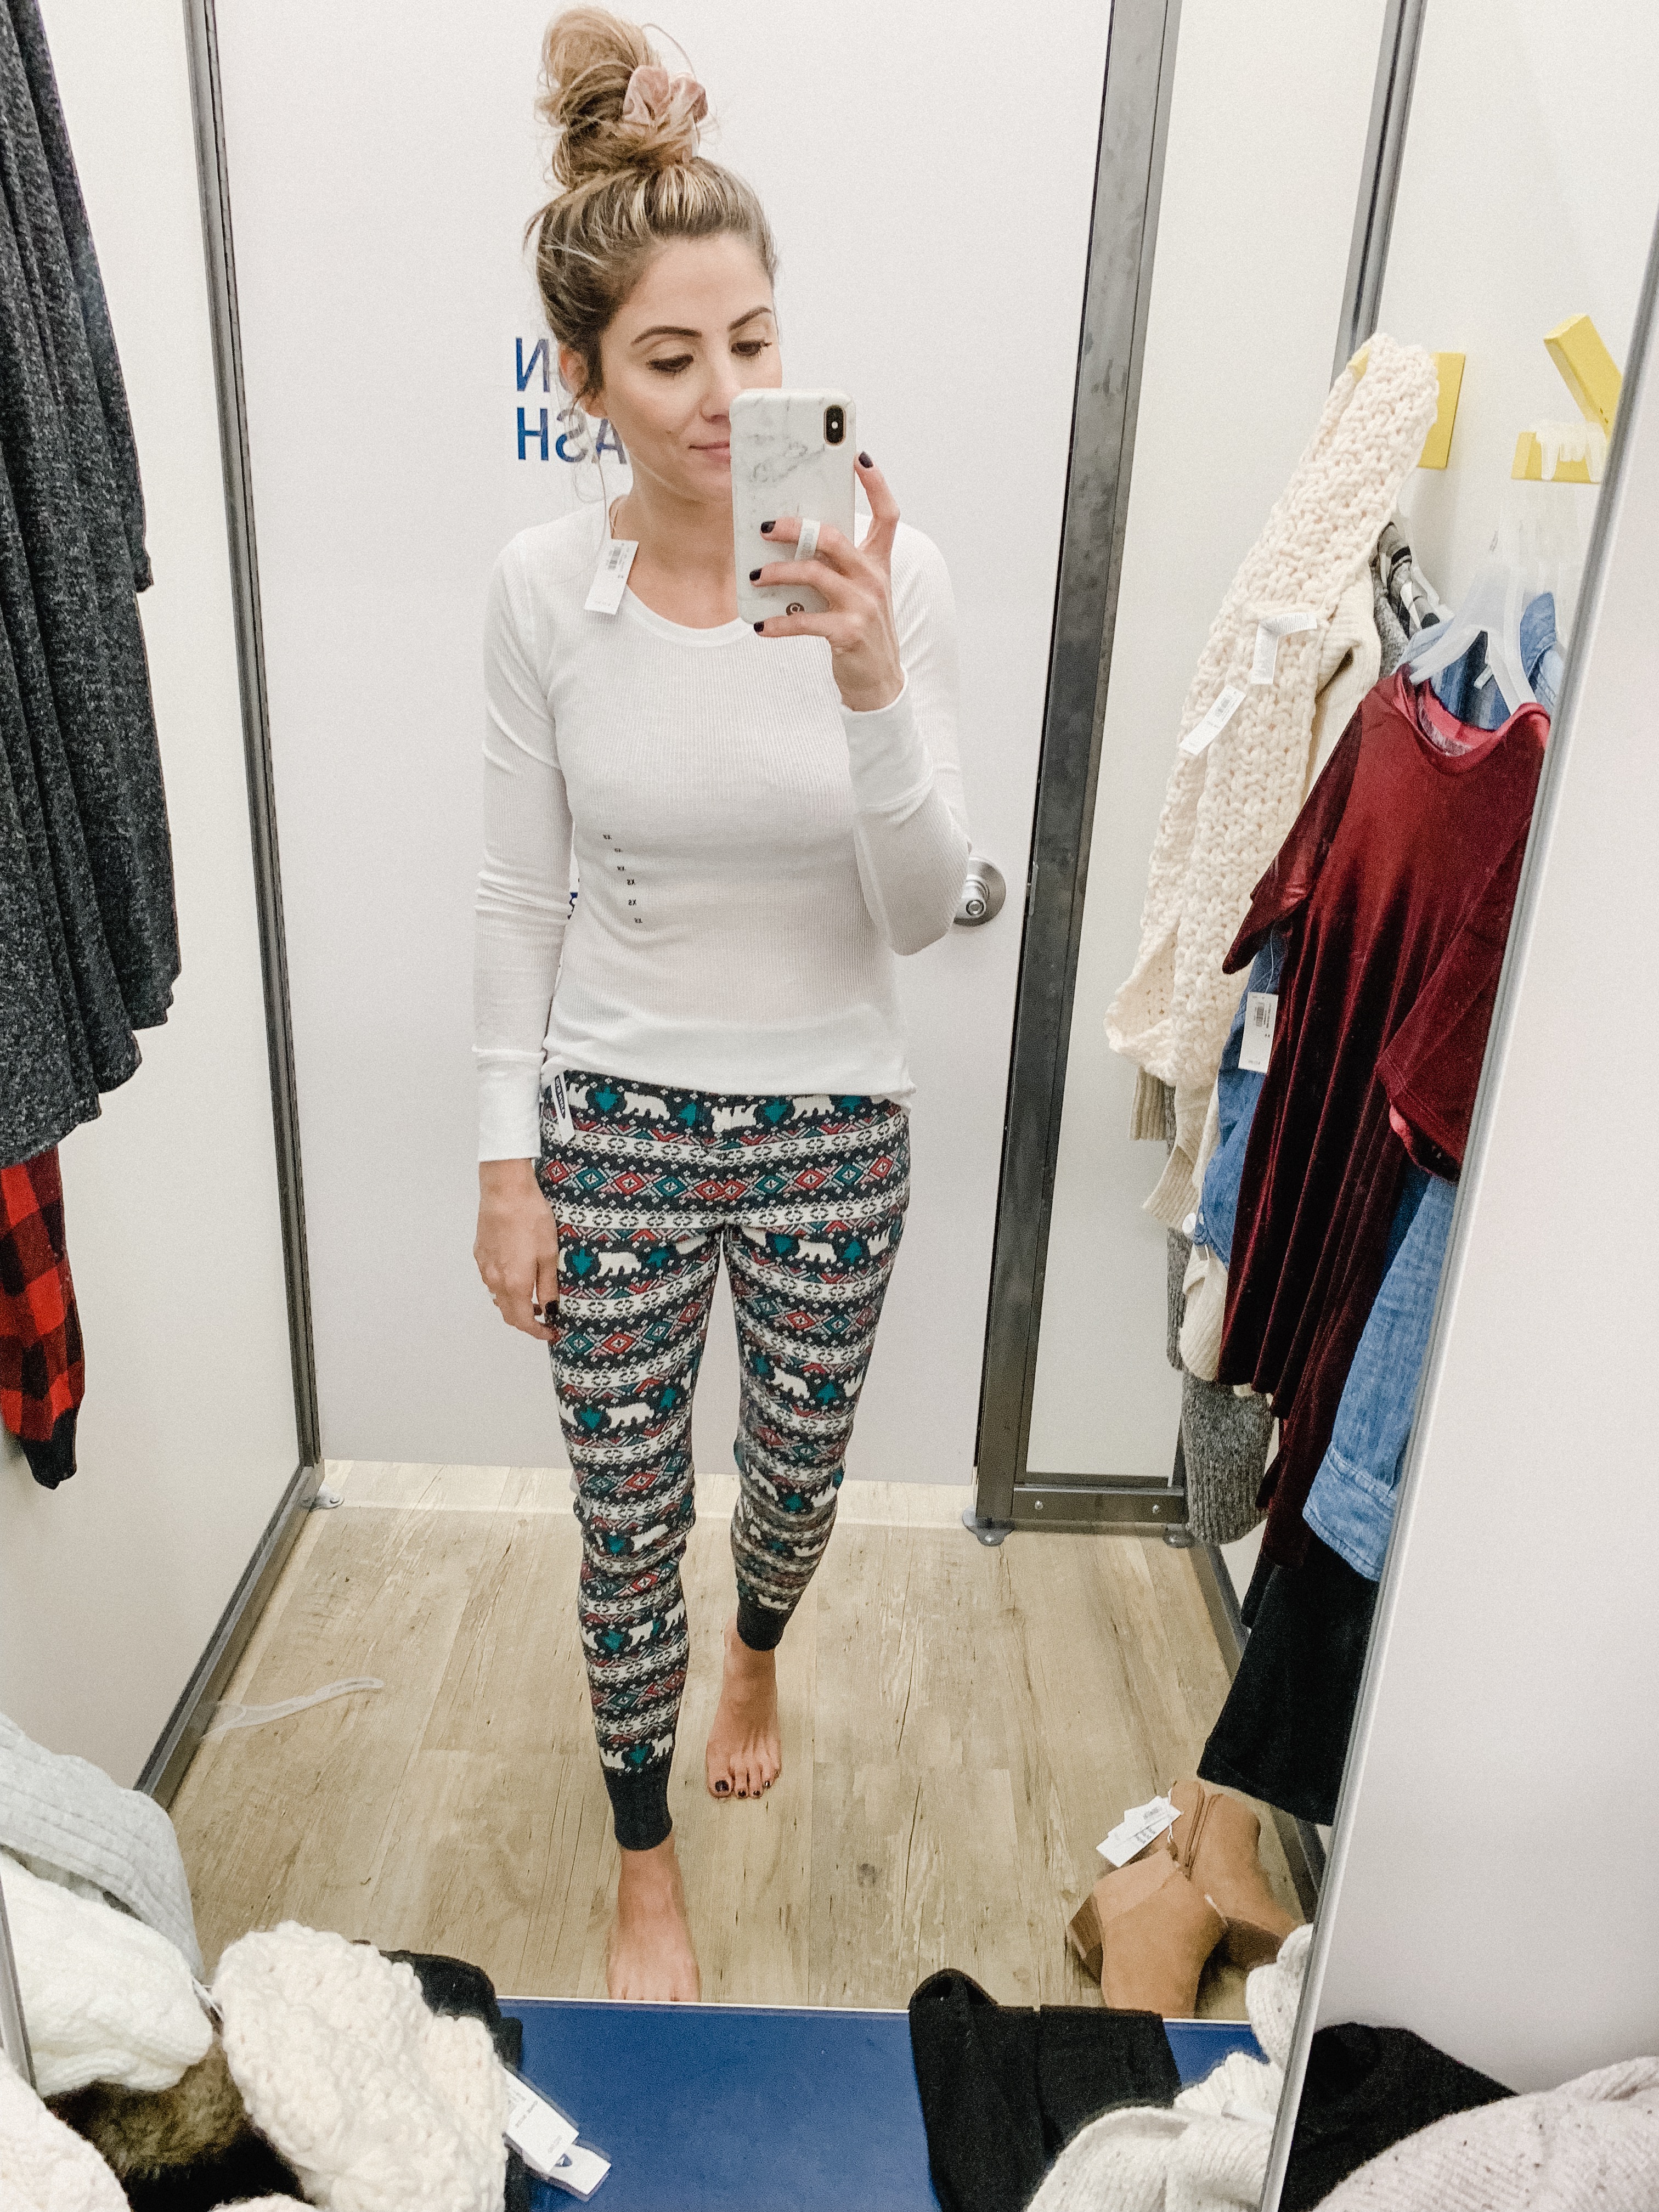 Connecticut life and style blogger Lauren McBride shares a November Old Navy Try On session featuring holiday ready casual and dressier looks!